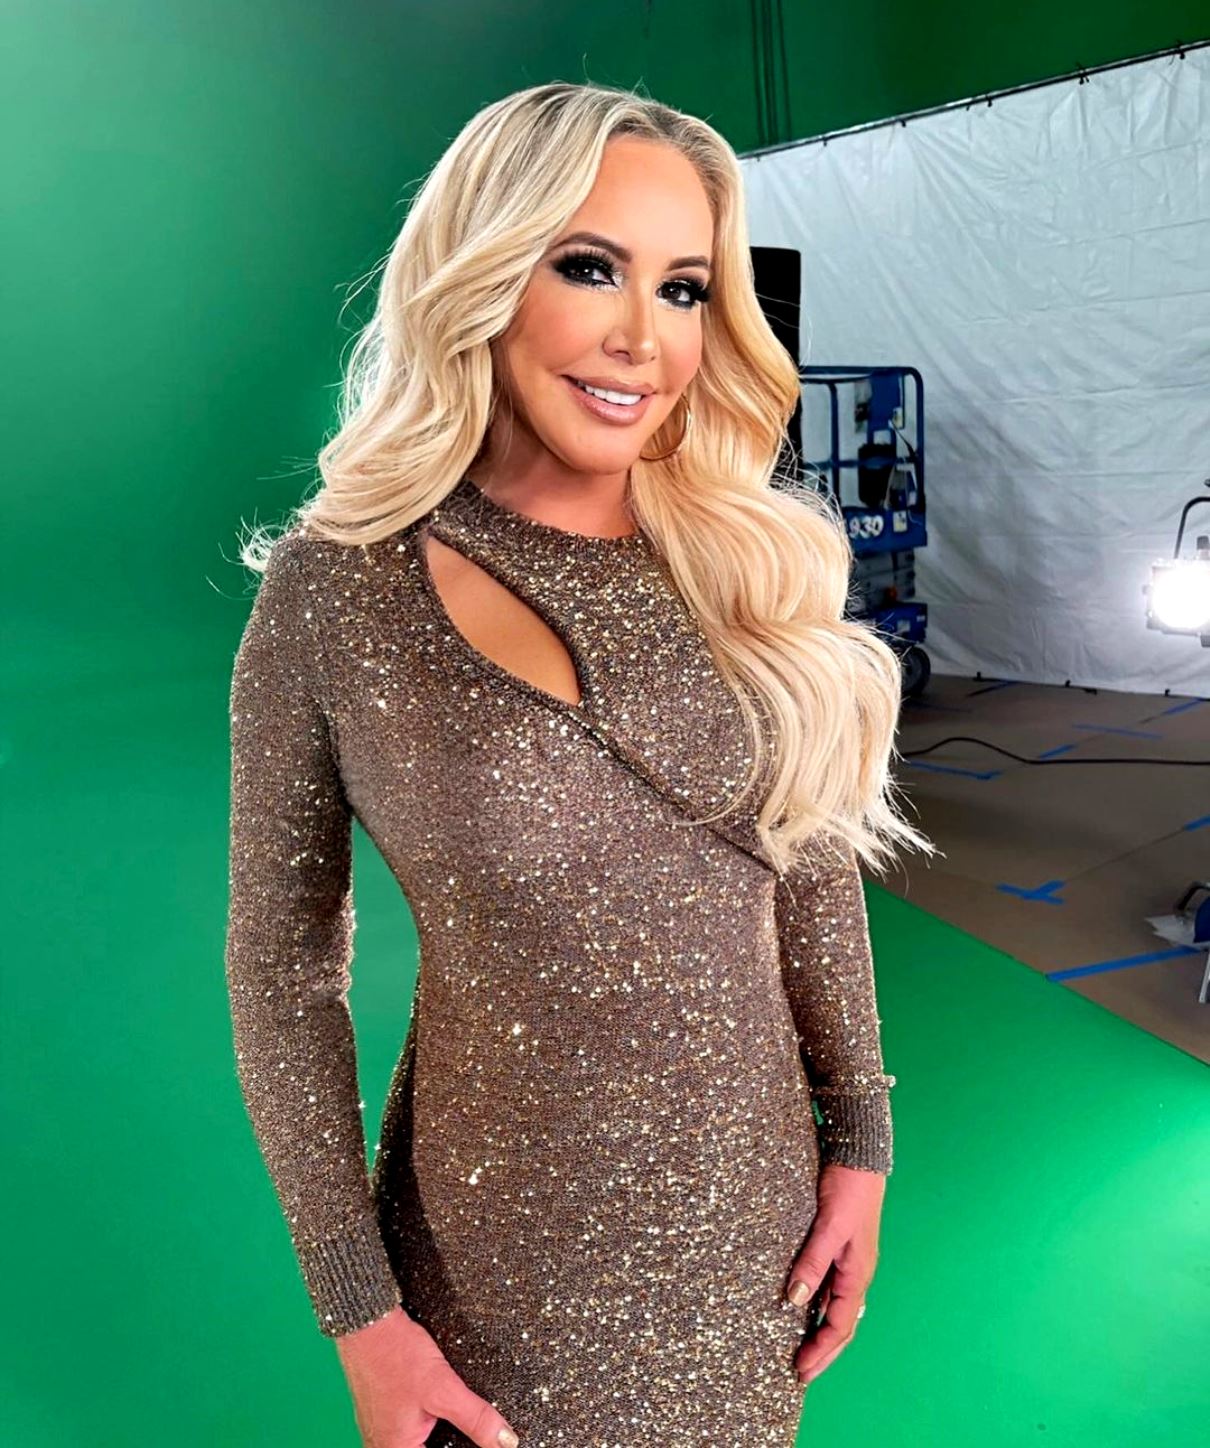 VIDEO: RHOC's Shannon Beador Crashes Into Home in Alleged Footage of DUI, See Pics of Damage After She Reportedly Sustains Broken Arm